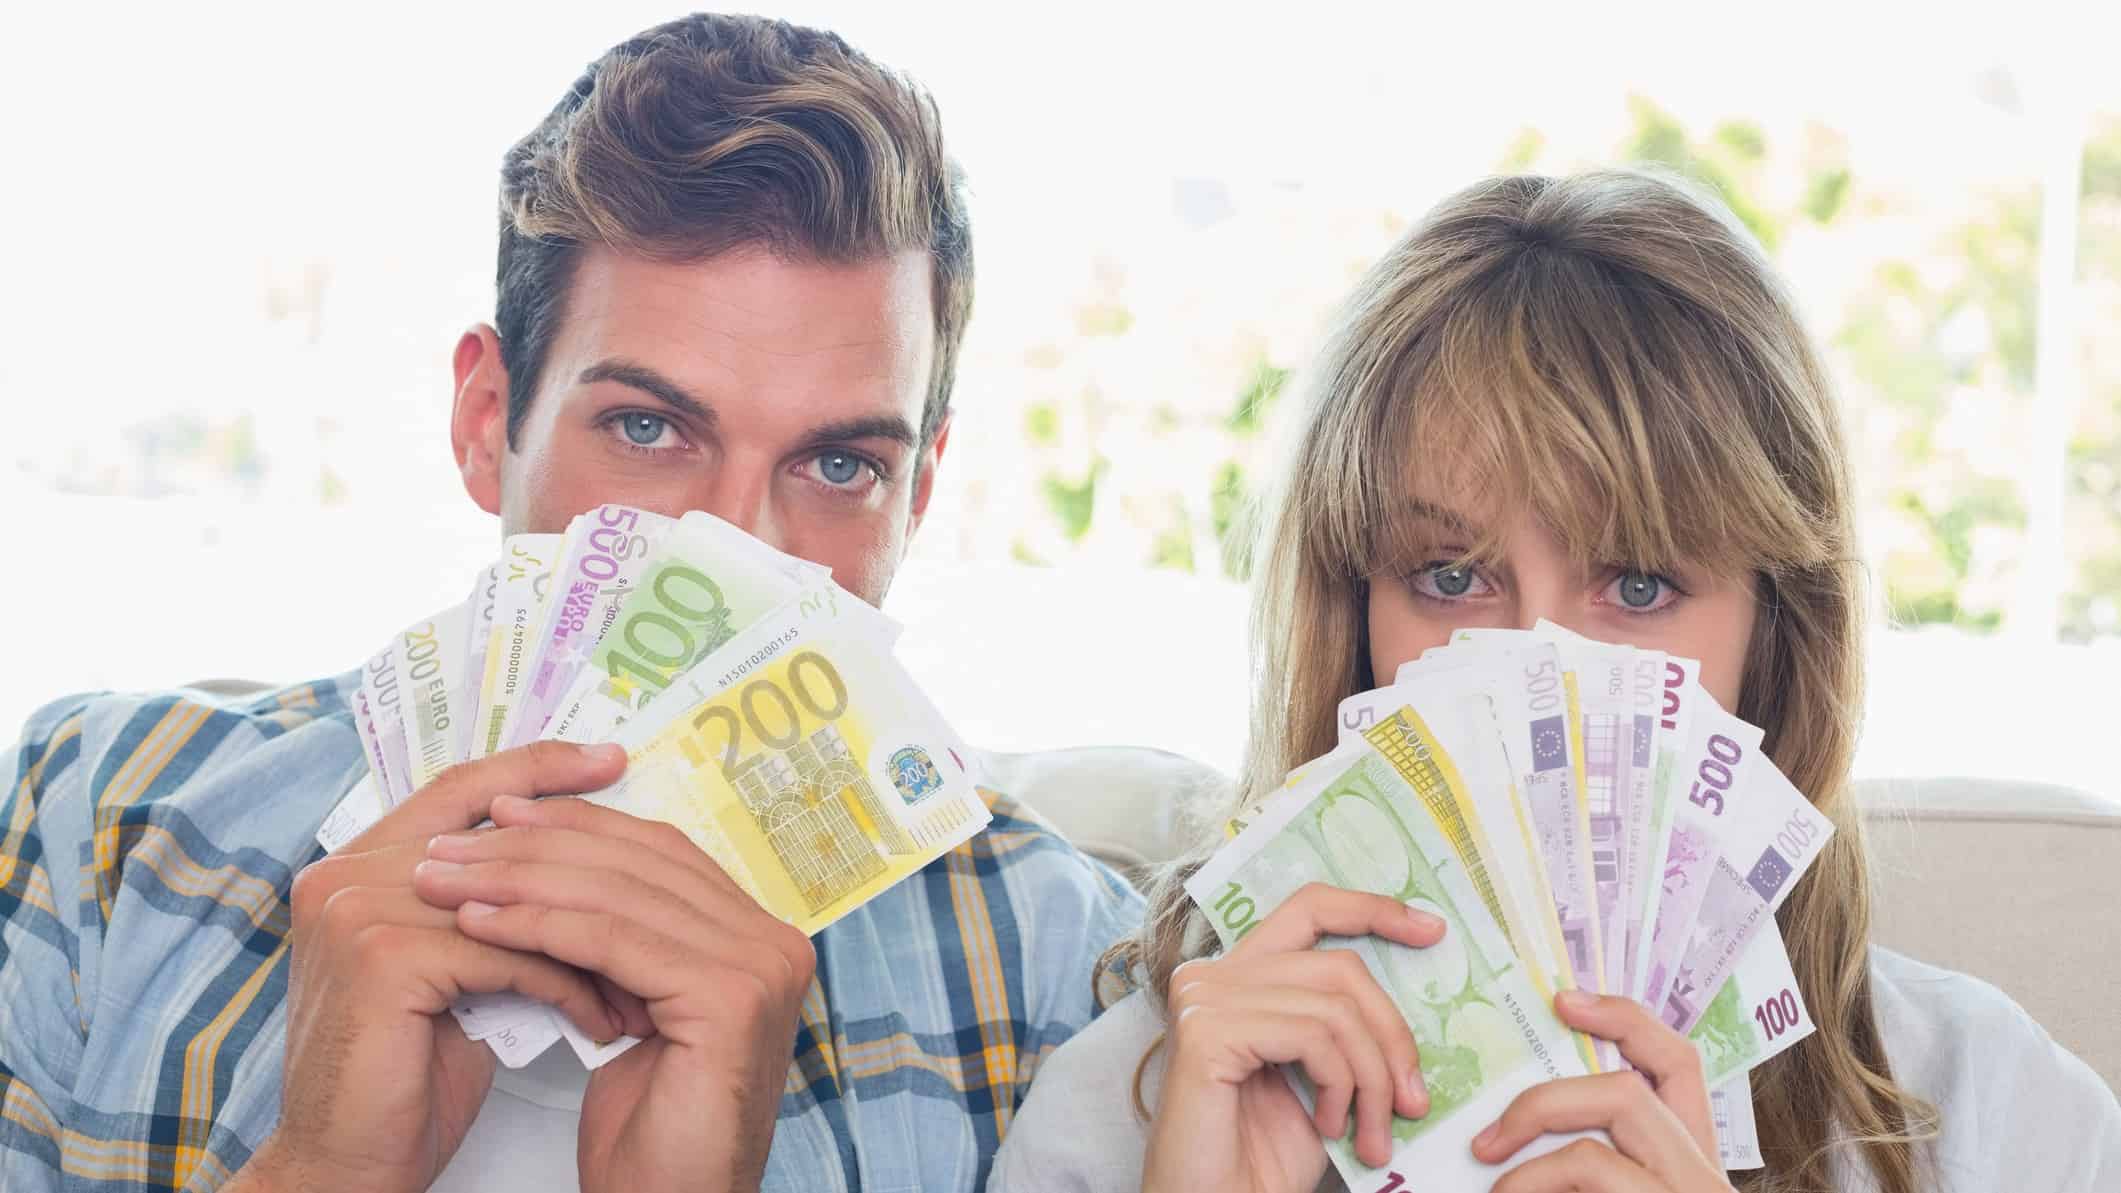 Man and woman holding up money over the bottom half of their face, symbolising dividends.